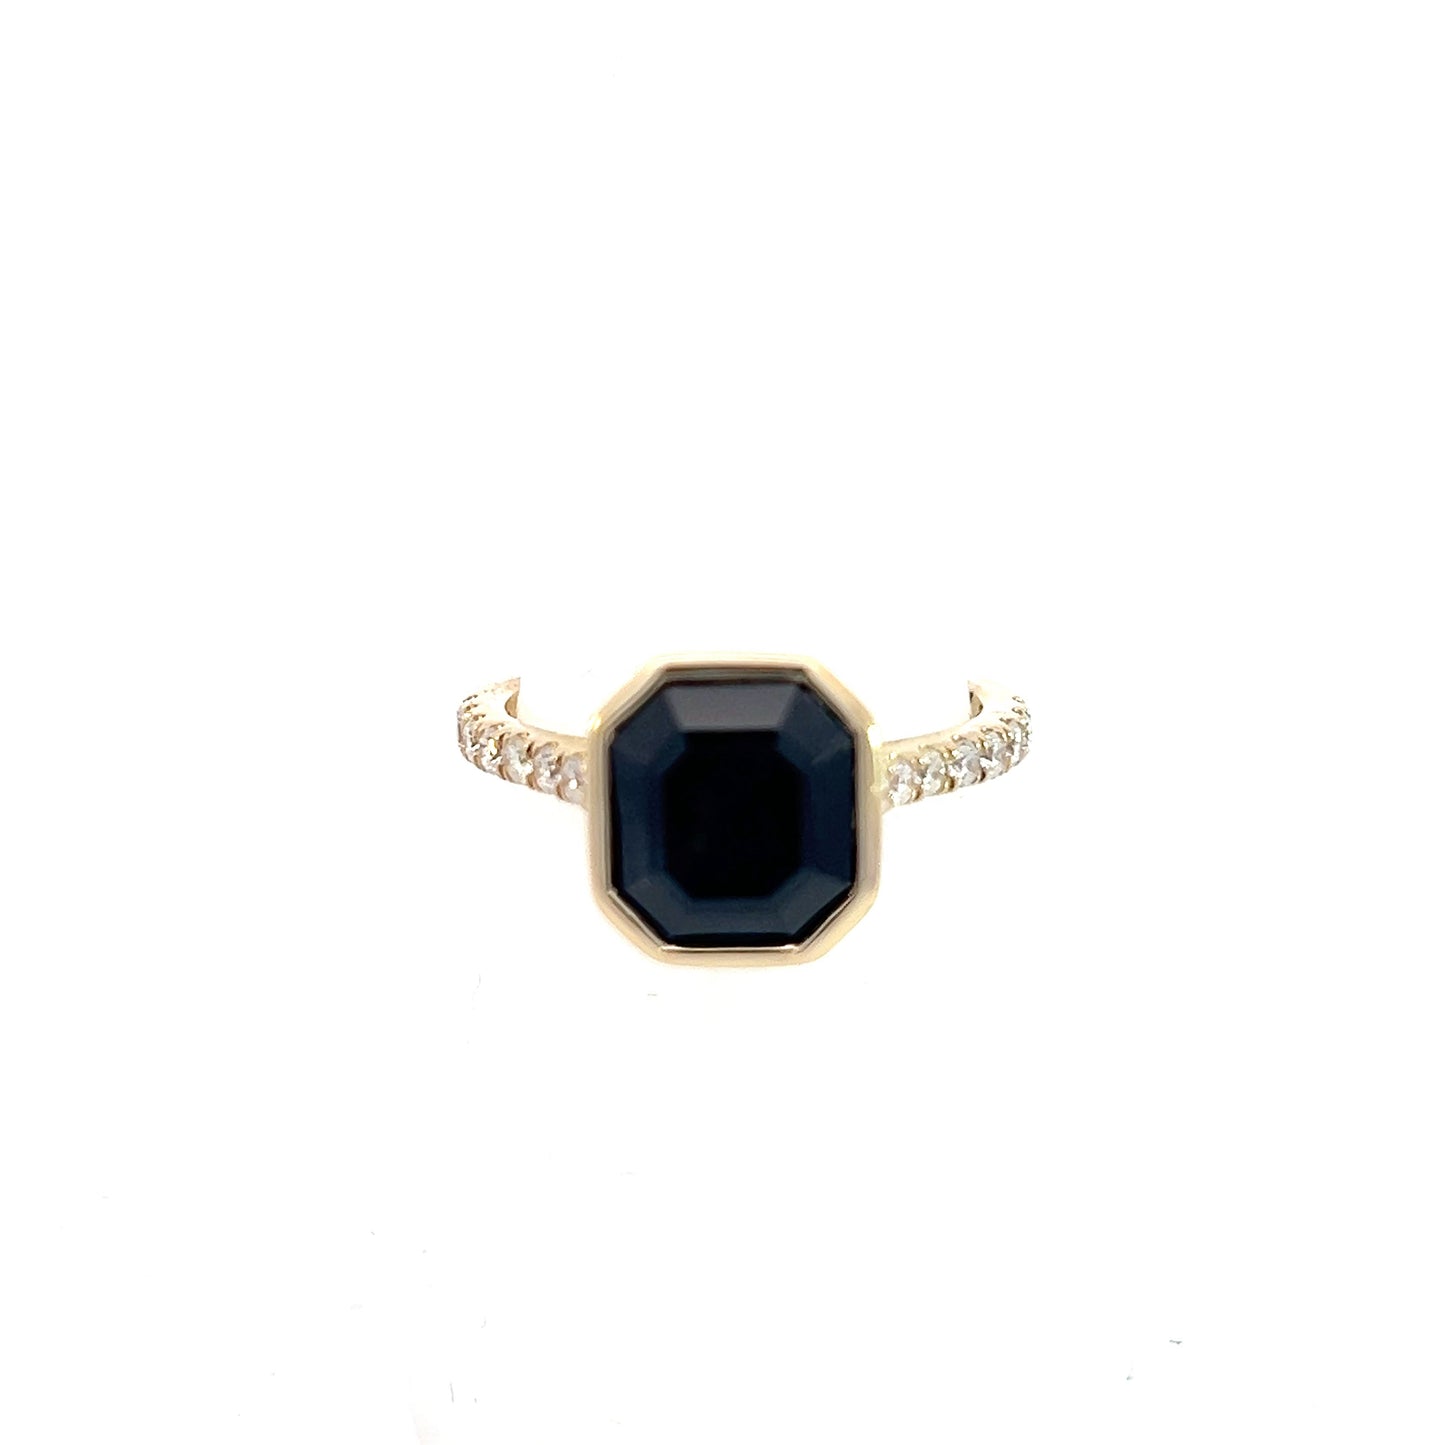 Natural Sapphire Diamond Ring 6.75 14k Yellow Gold 4.65 TCW Certified $3,950 310597 - Certified Fine Jewelry